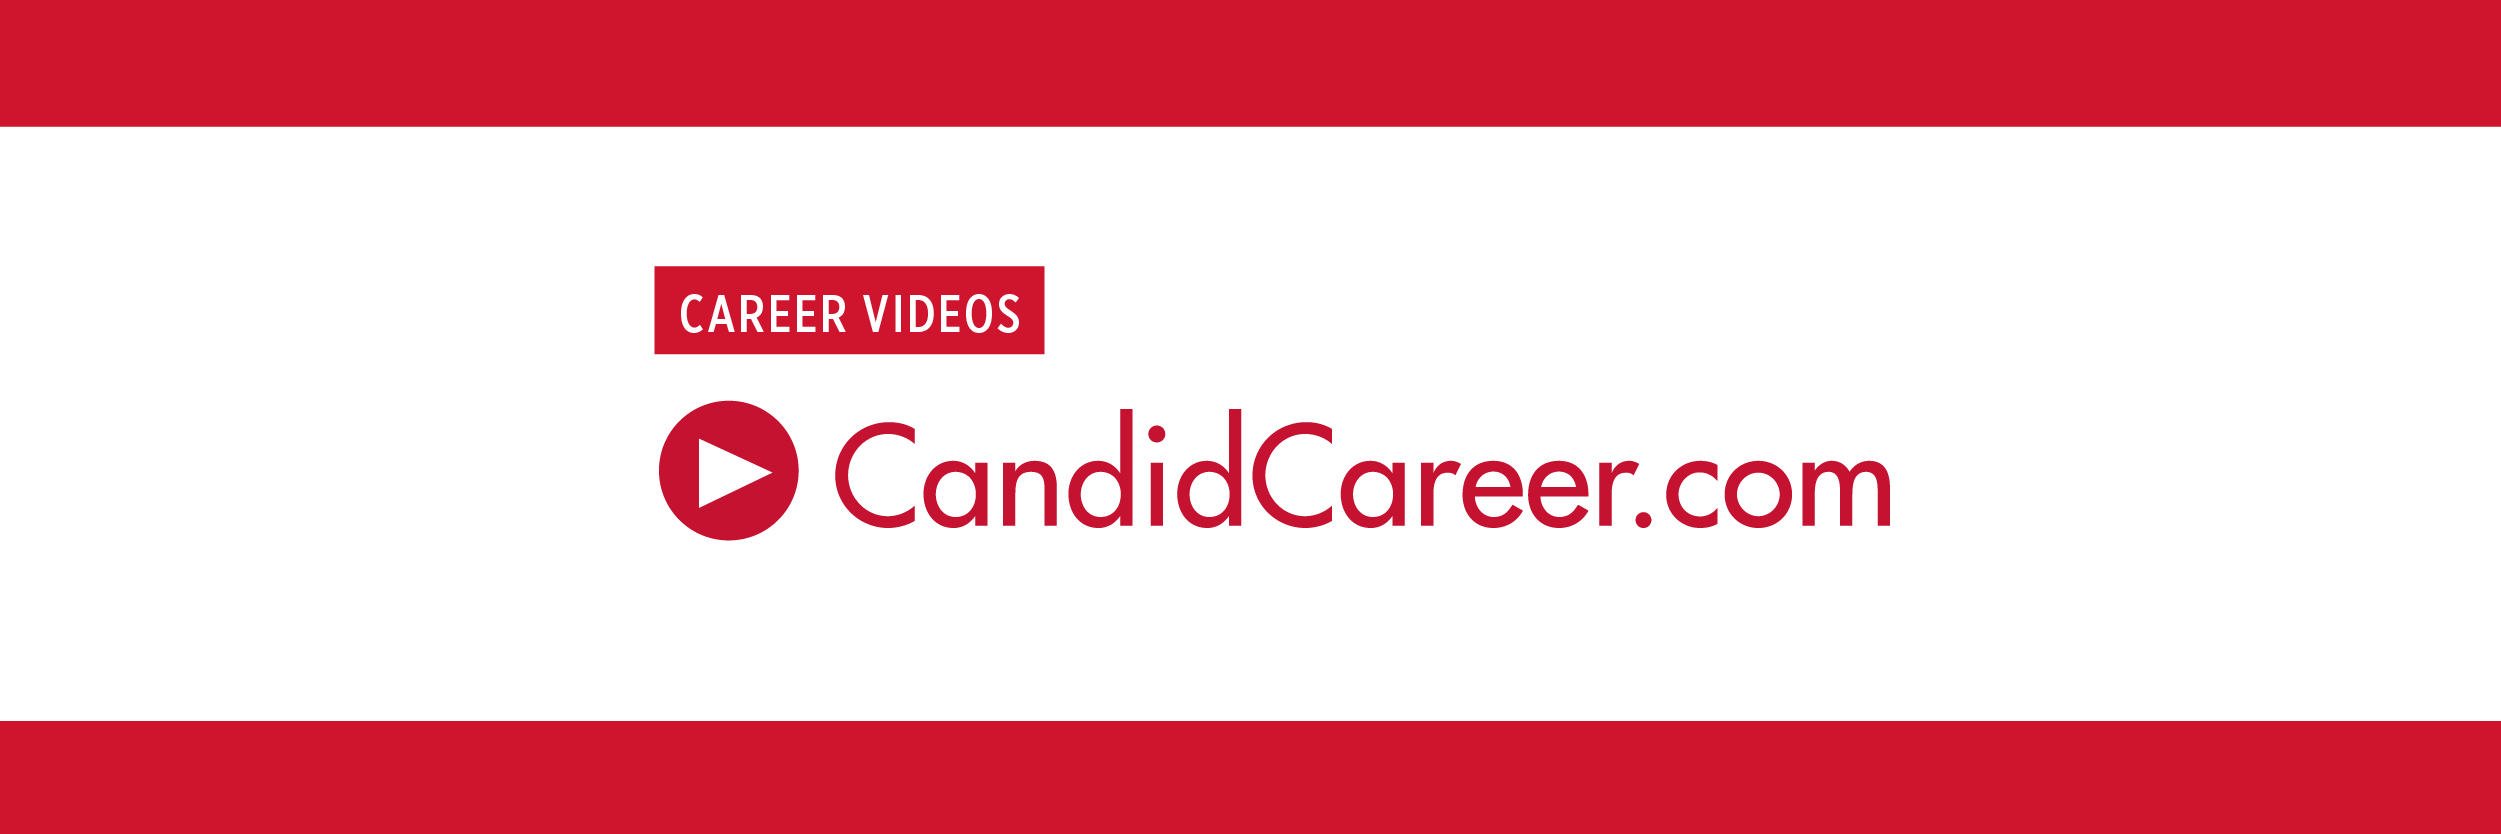 Candid Careers - Videos to help students with Career Management